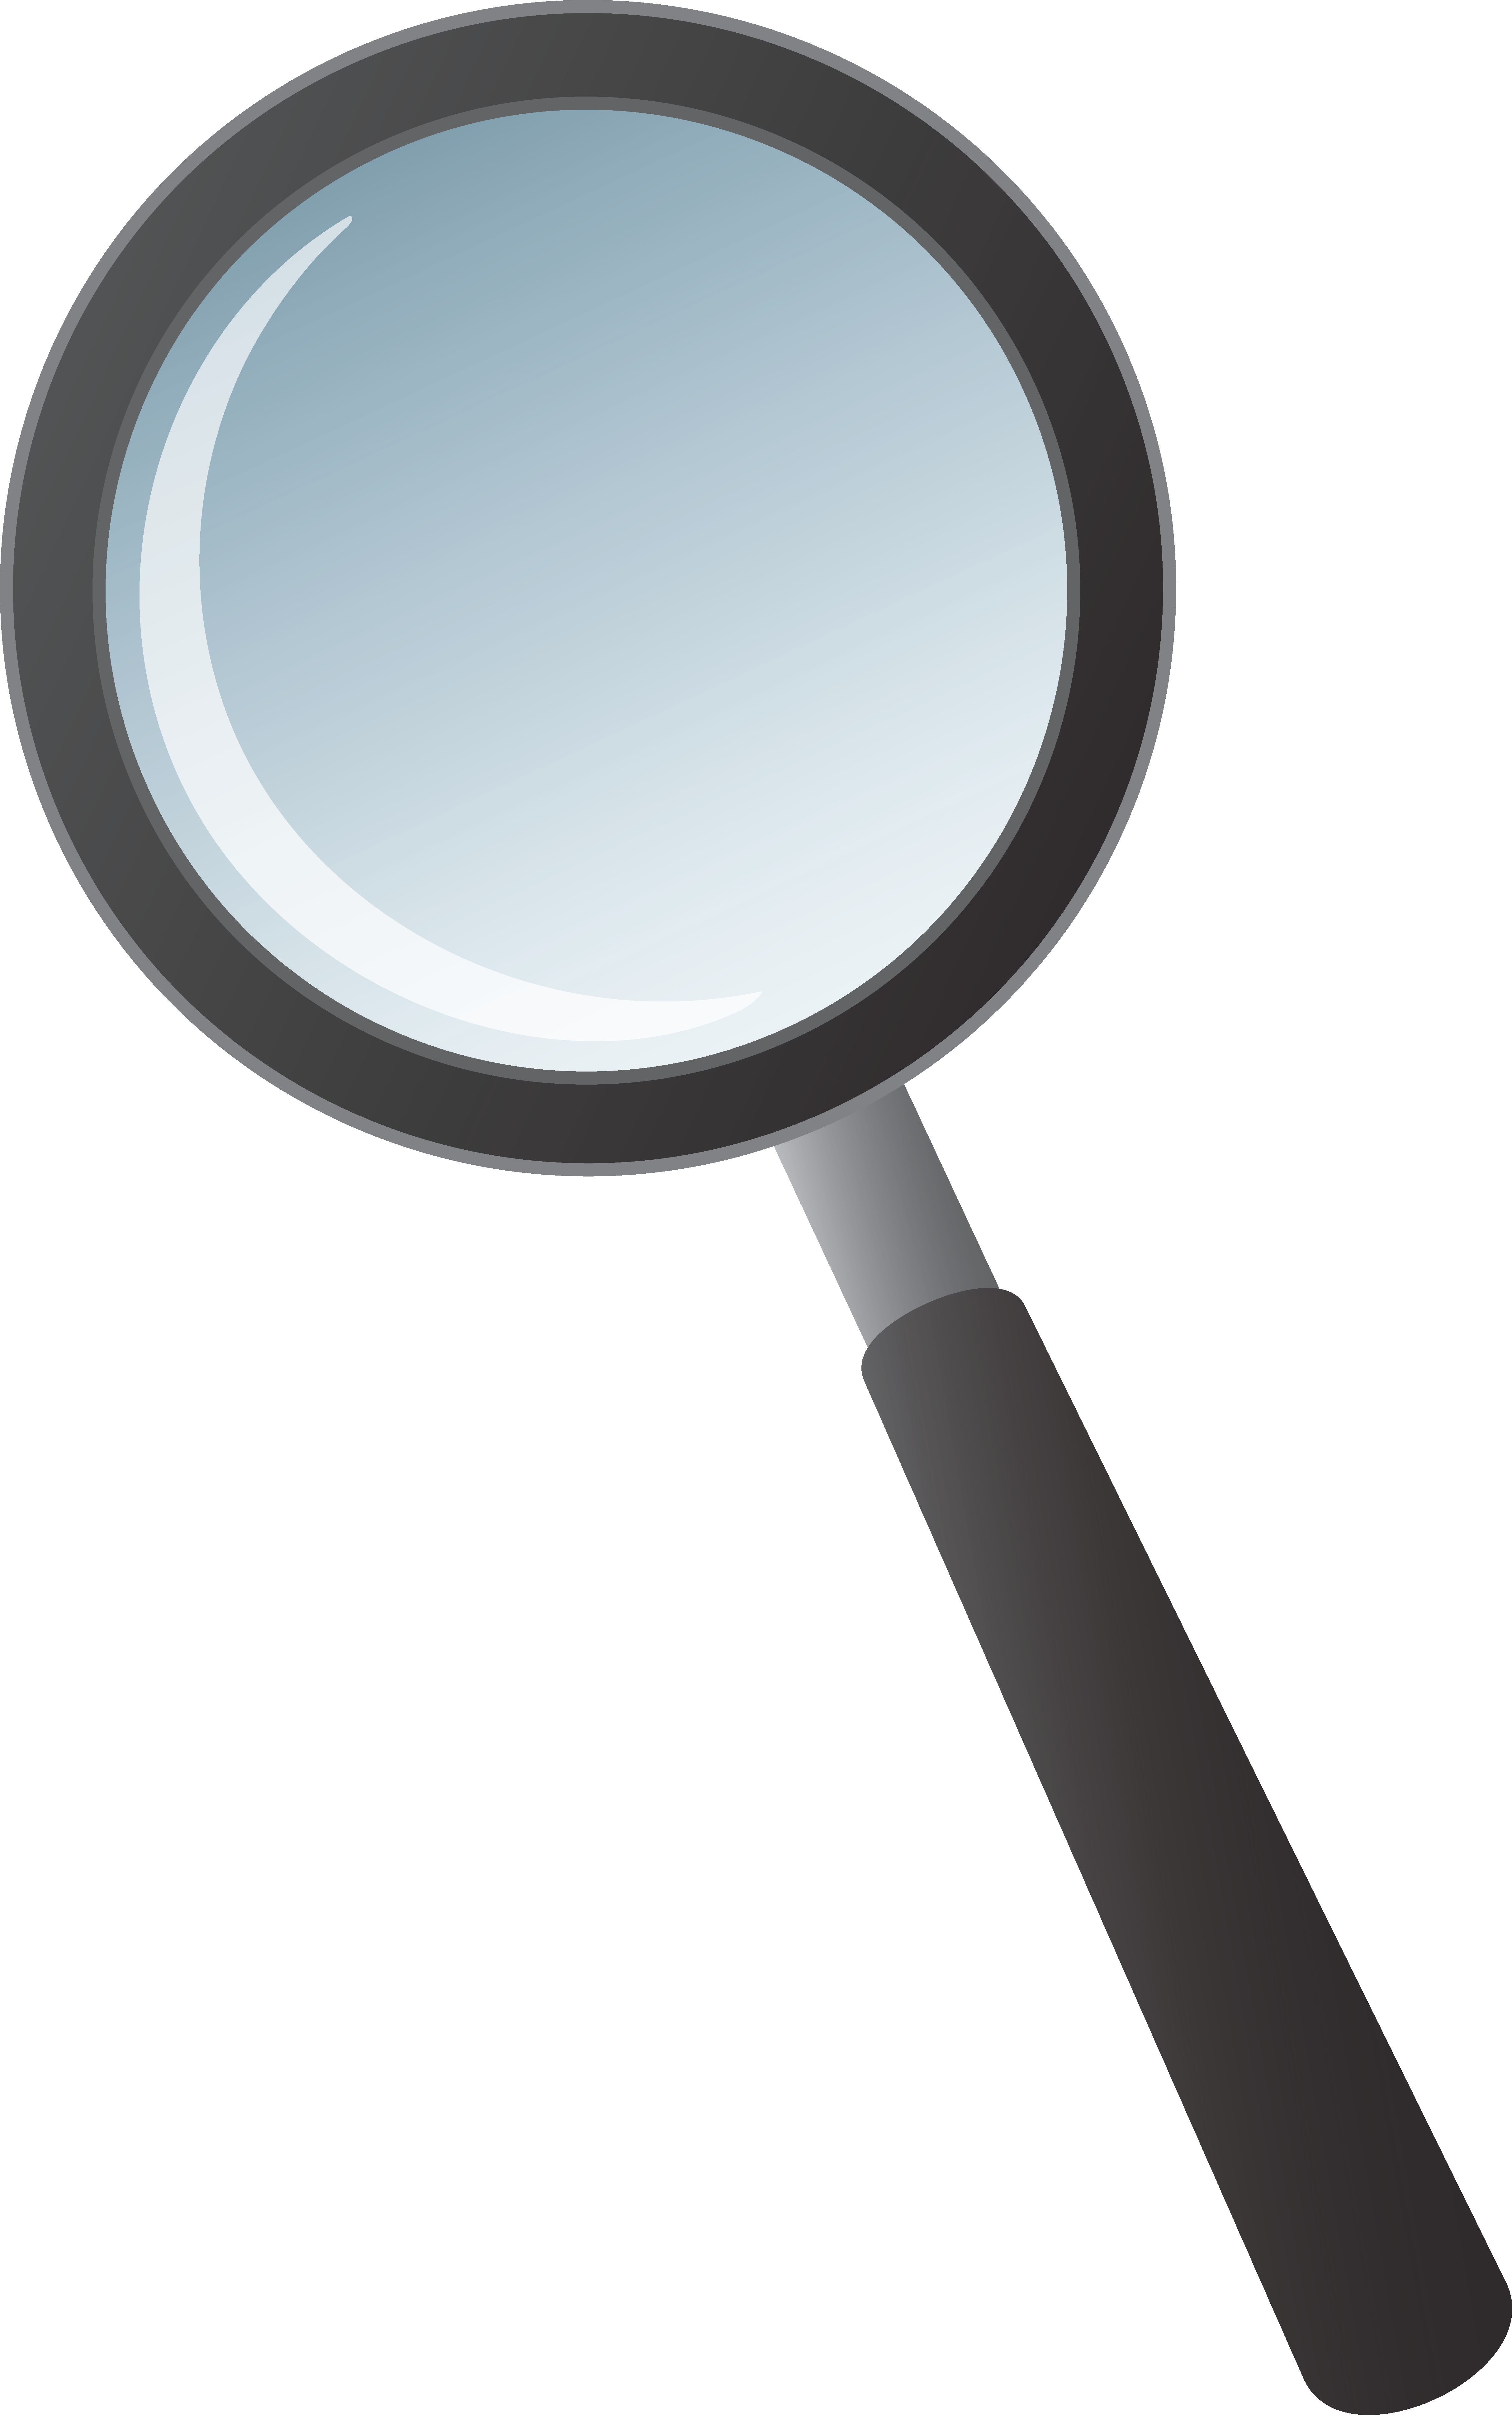 Magnifying glass clip art 